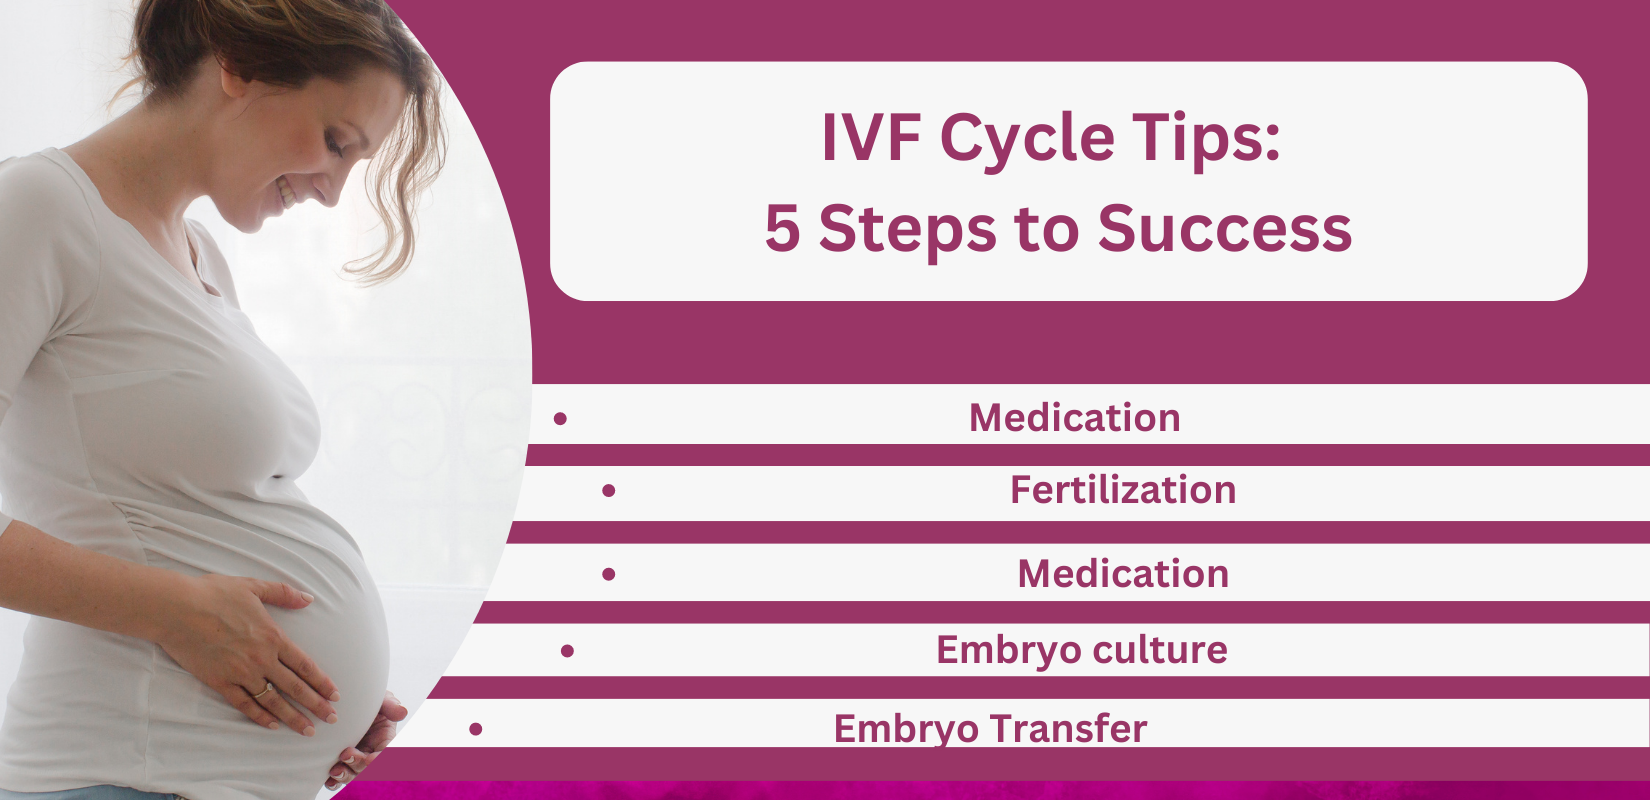 IVF Cycle Tips: 5 Steps to Success